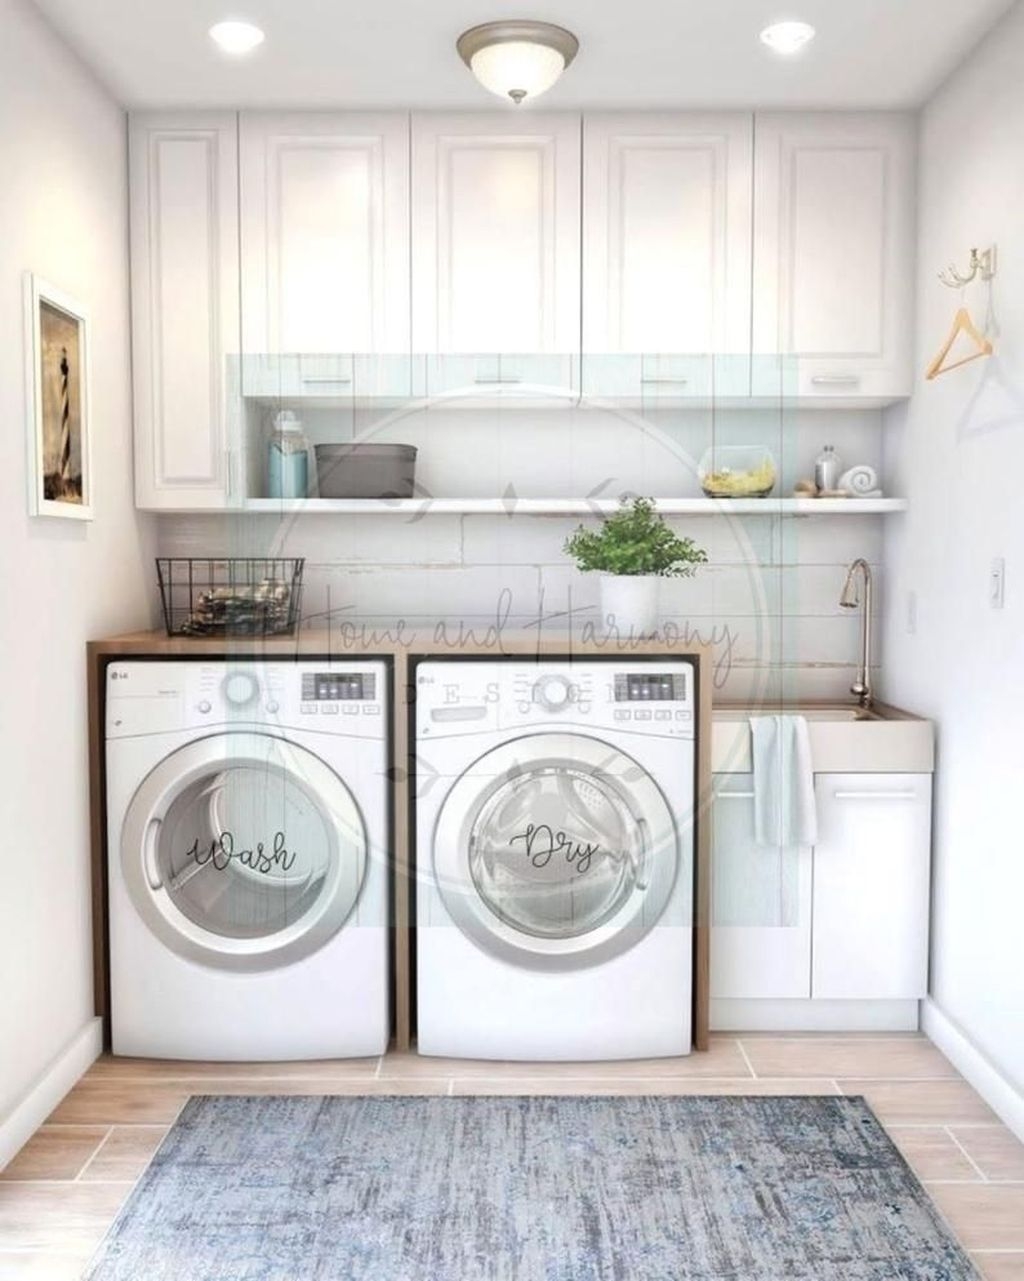 Inspiring Laundry Room Design With French Country Style 14